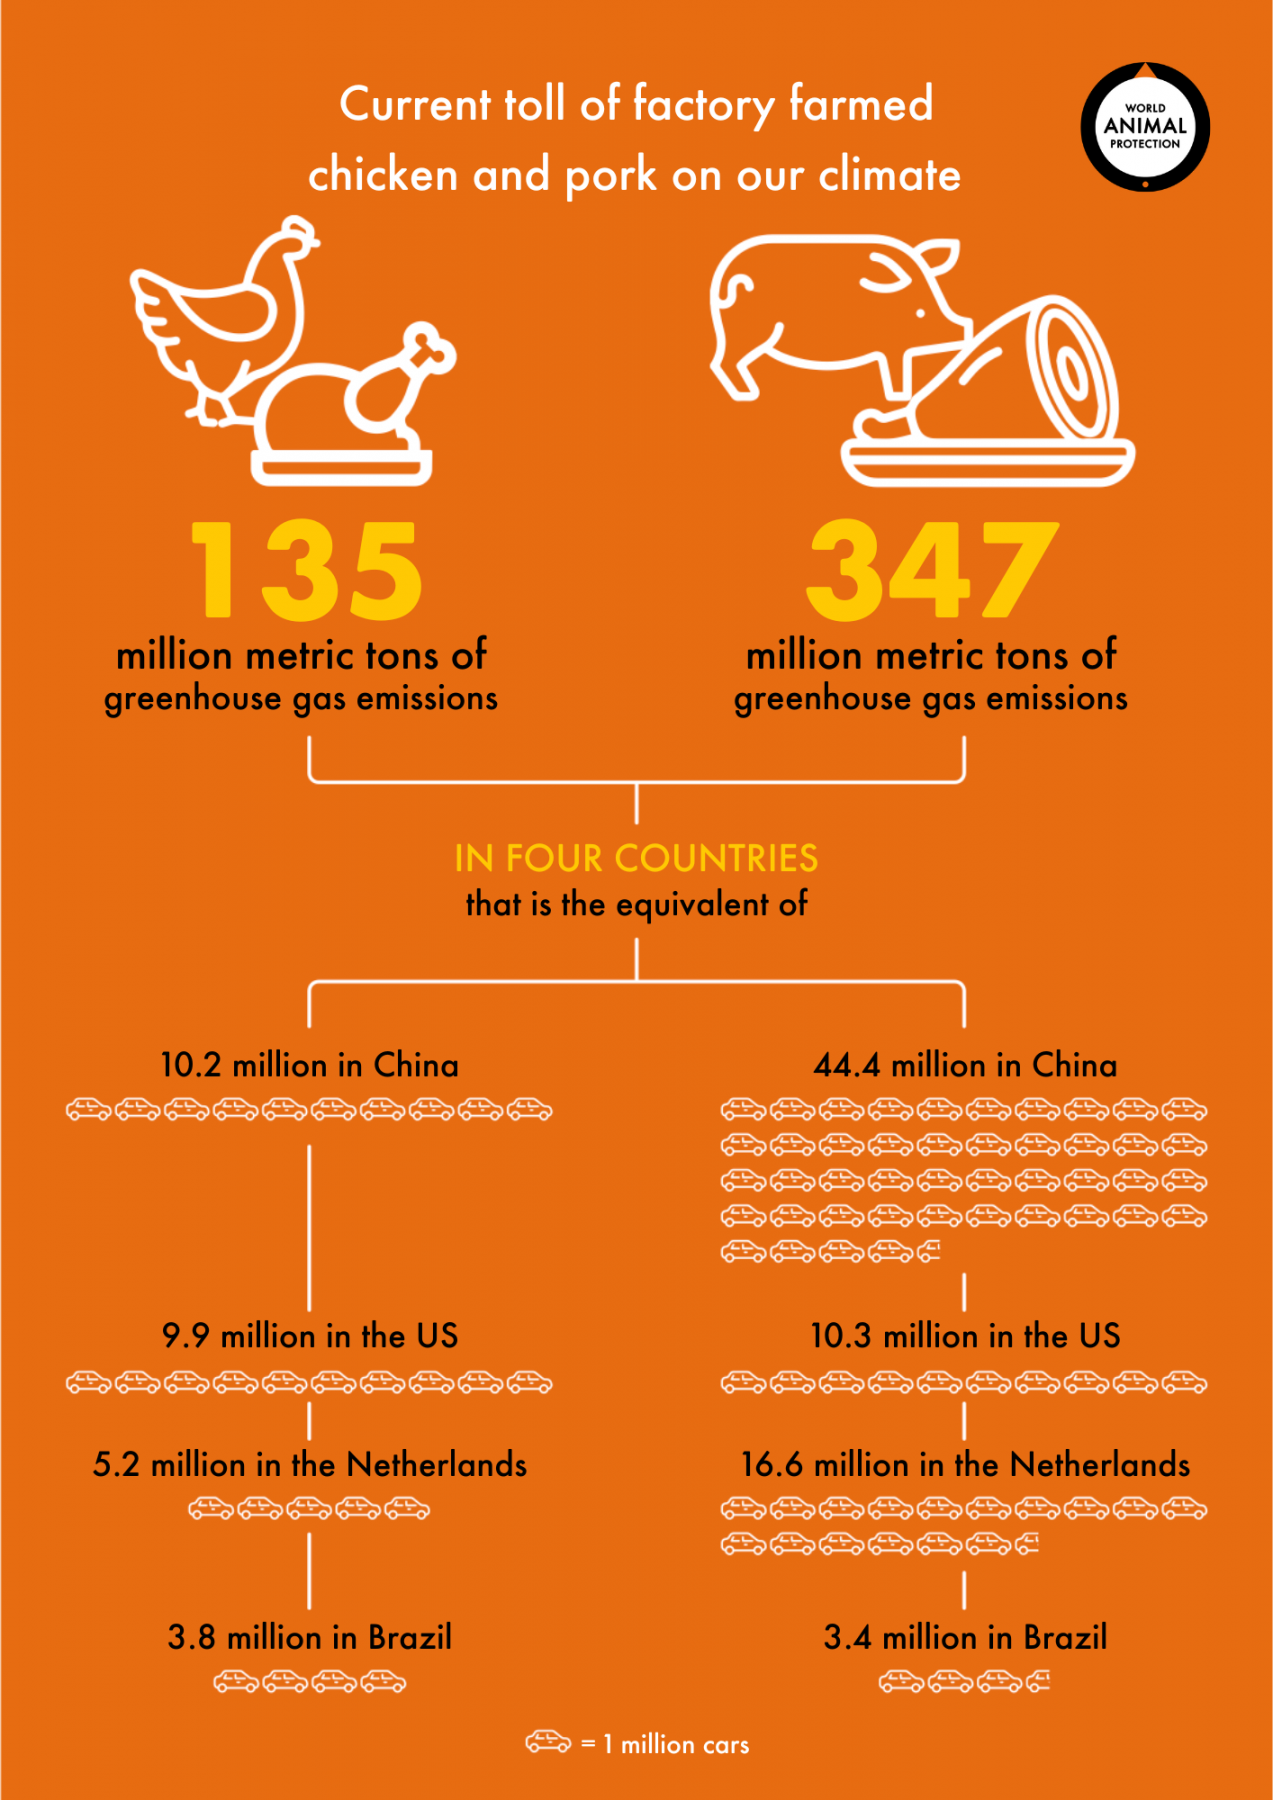 toll on climate of factory farmed chicken and pork infographic